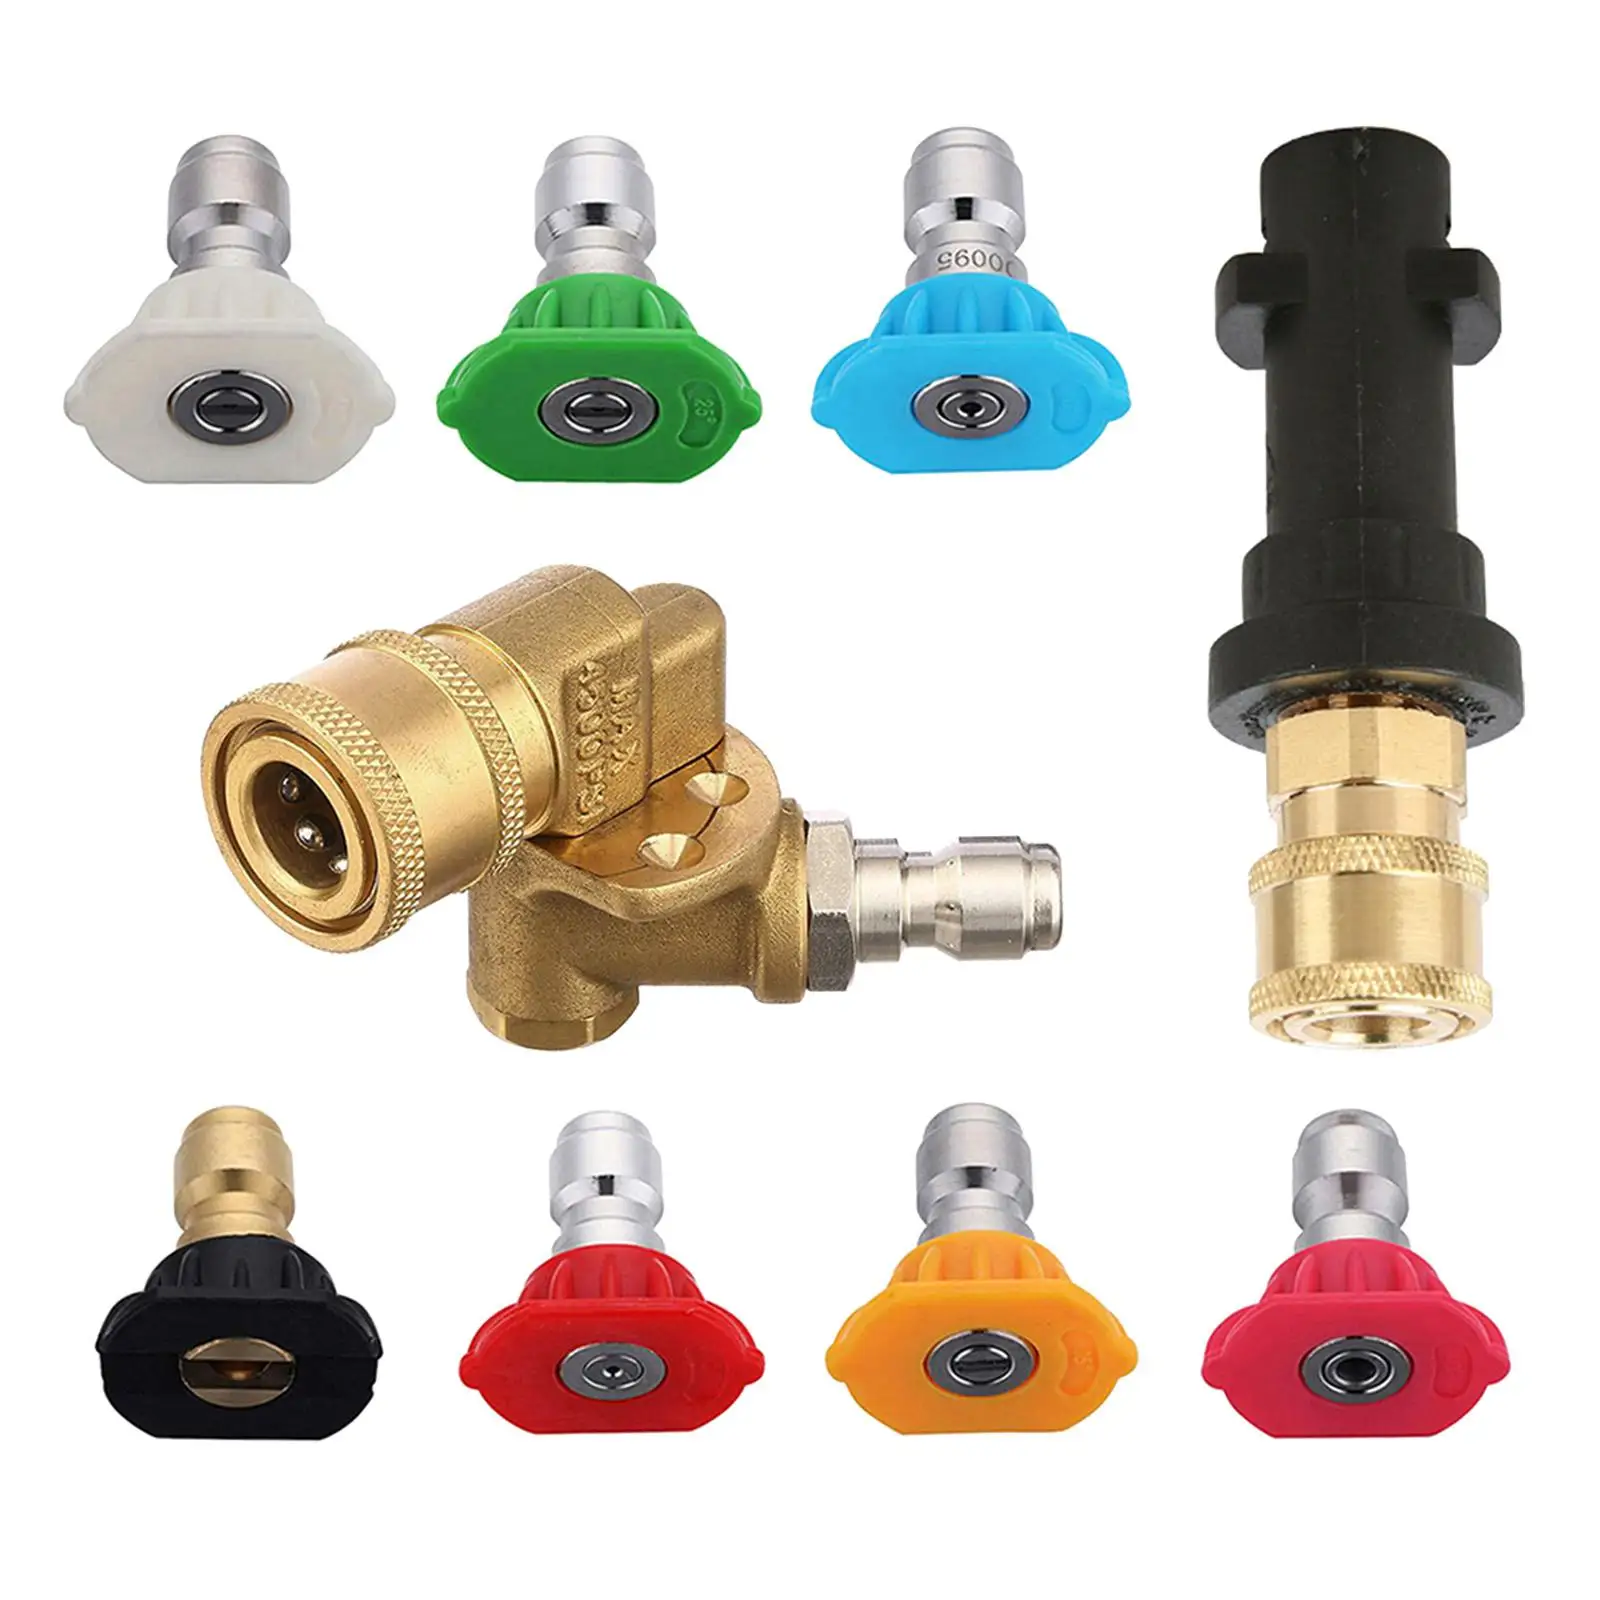 Adjustable Pressure Washing Adapter 1/4inch Quick Connector Nozzles 5 Angles